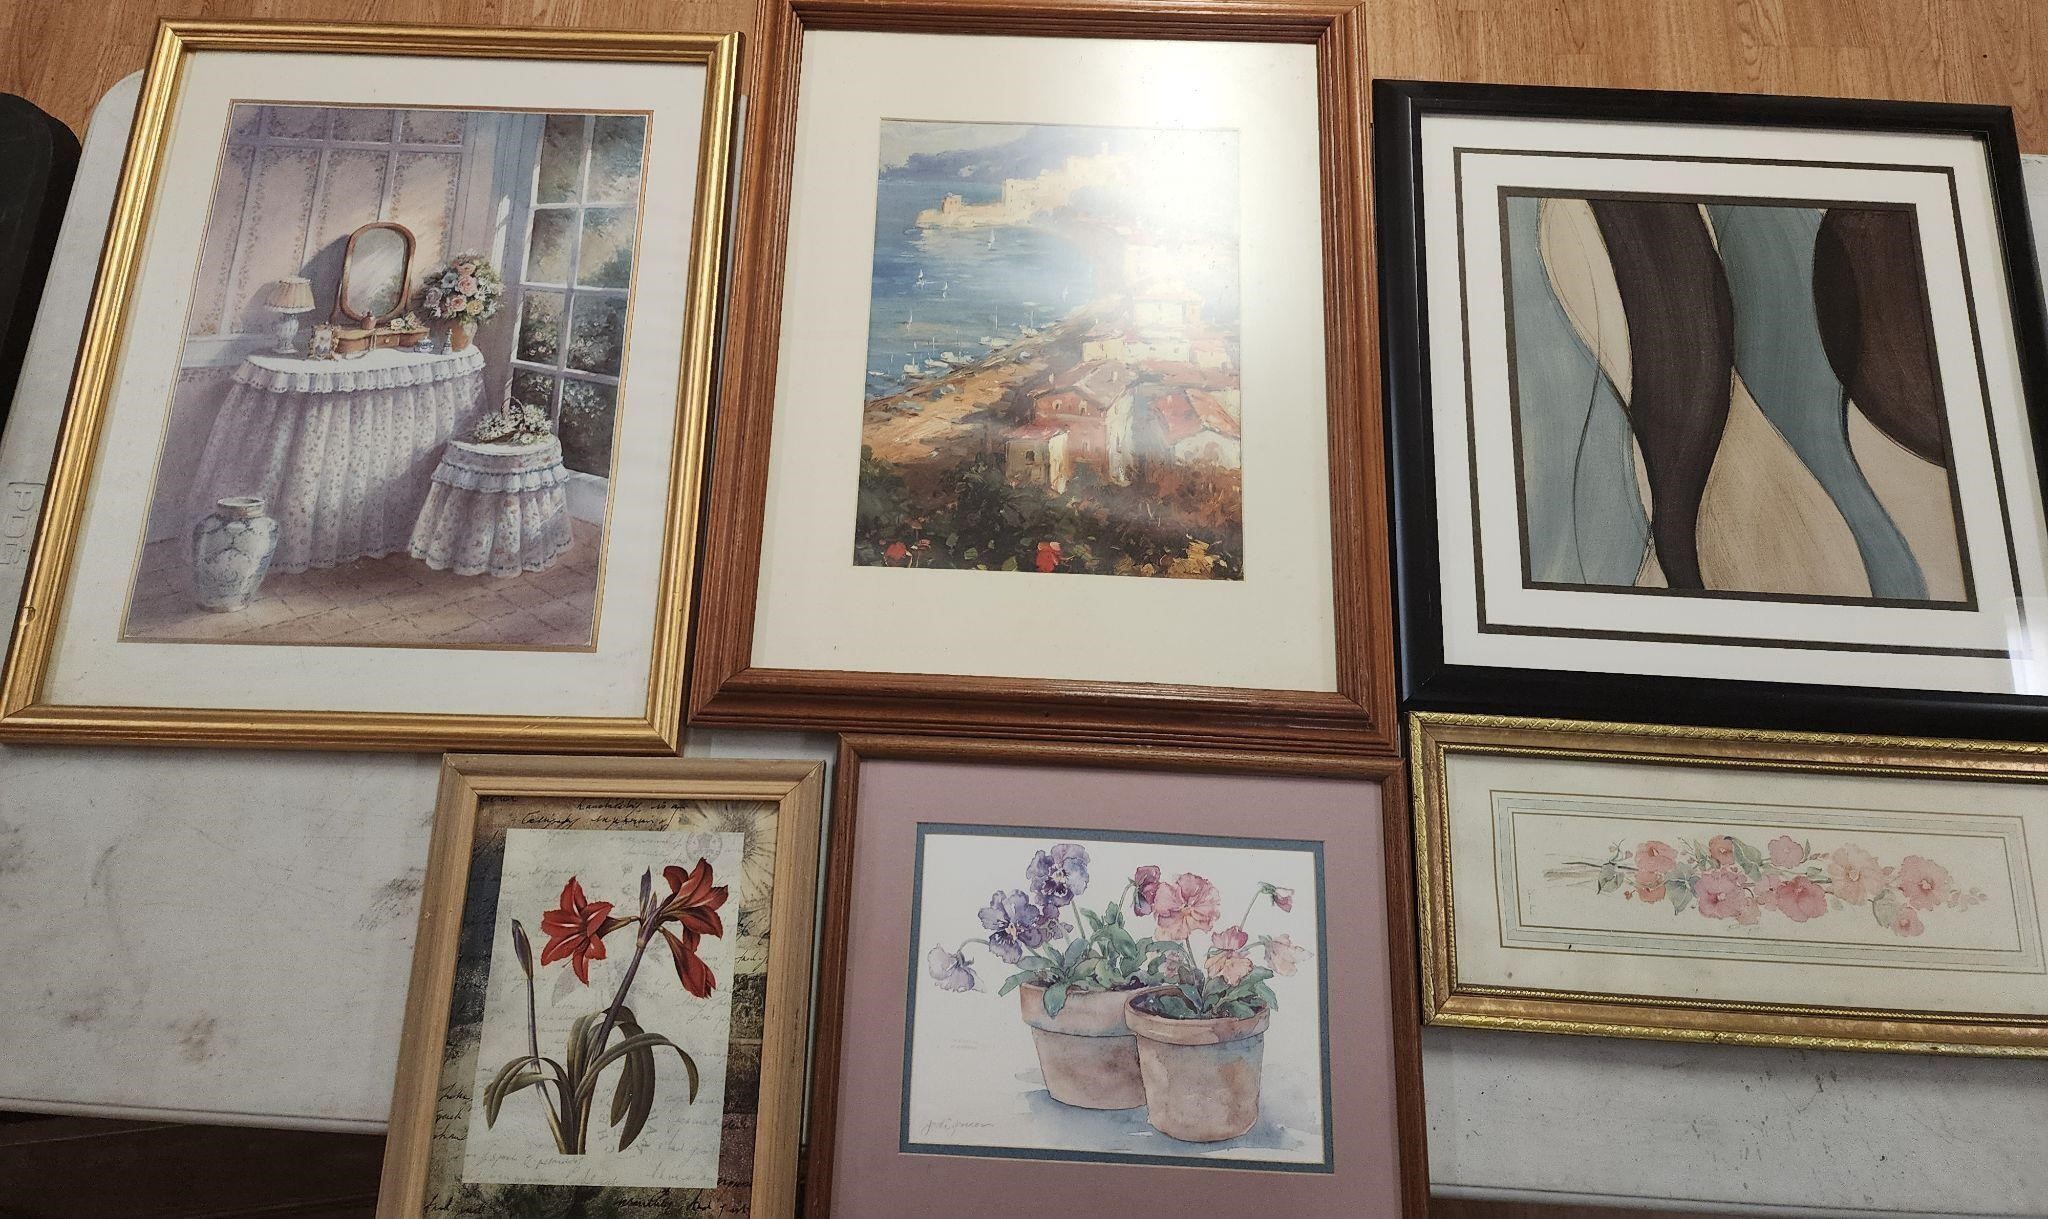 Lot of 6 Home Decor Framed Pictures